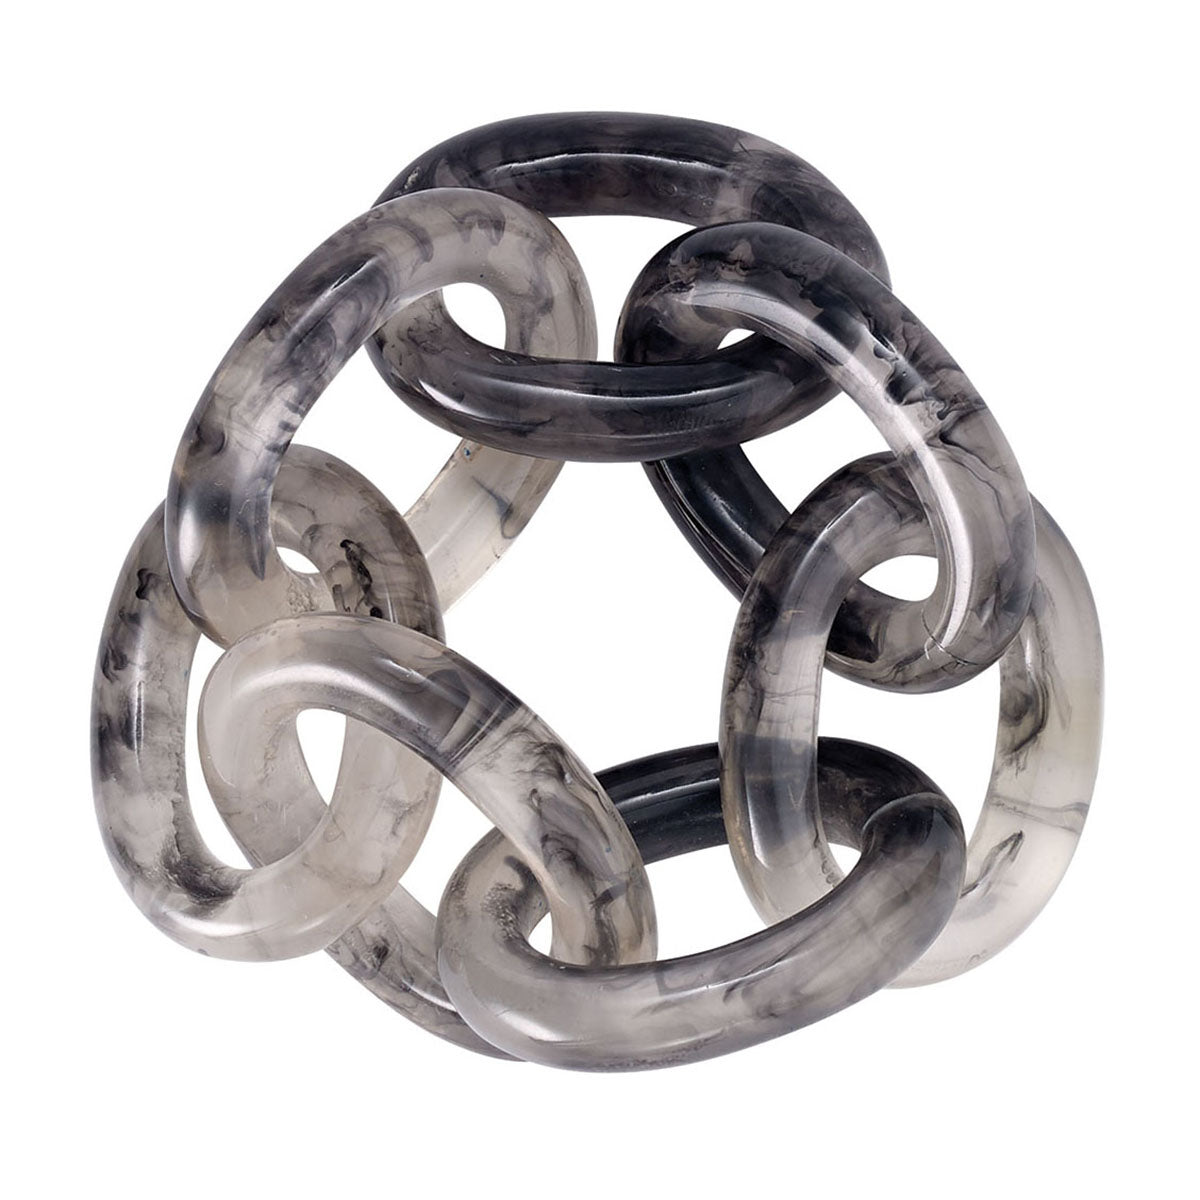 Chain Link Napkin Rings Set of 4